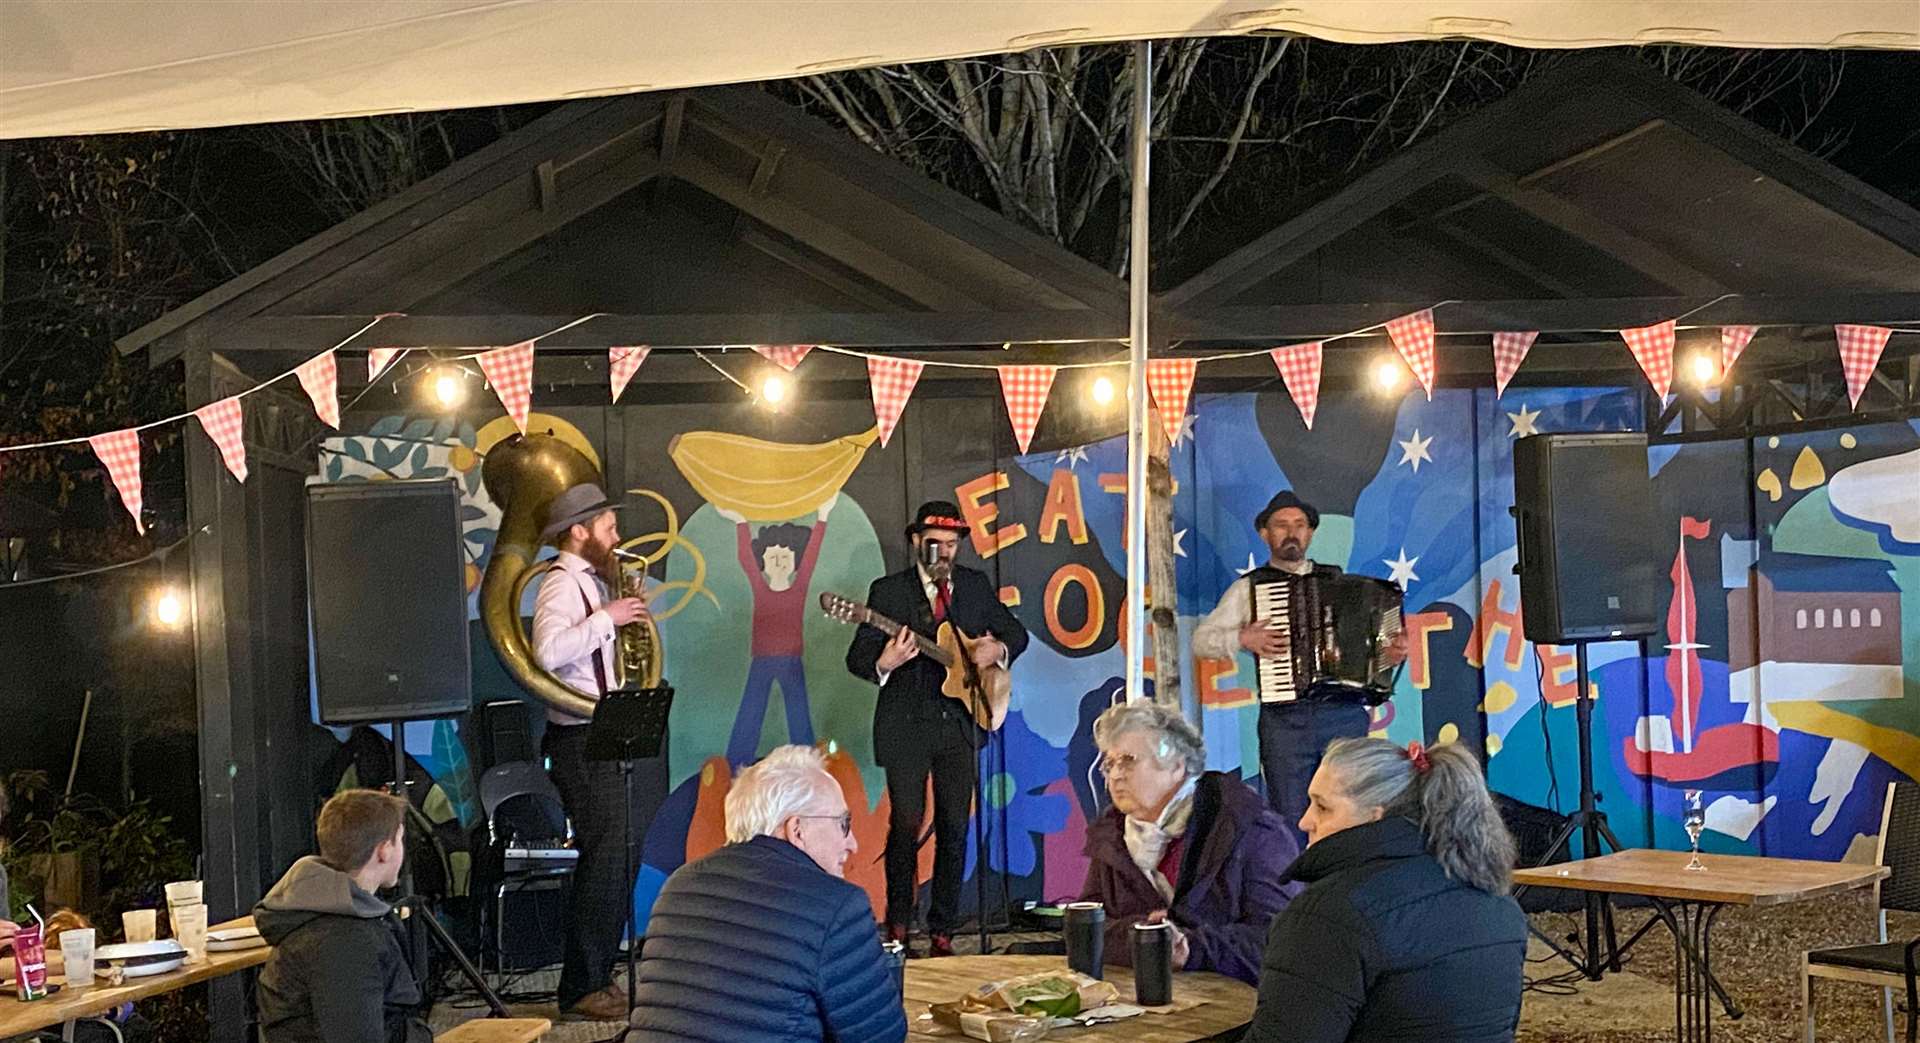 Local band the Beard Conspiracy were performing upbeat folk music for the evening